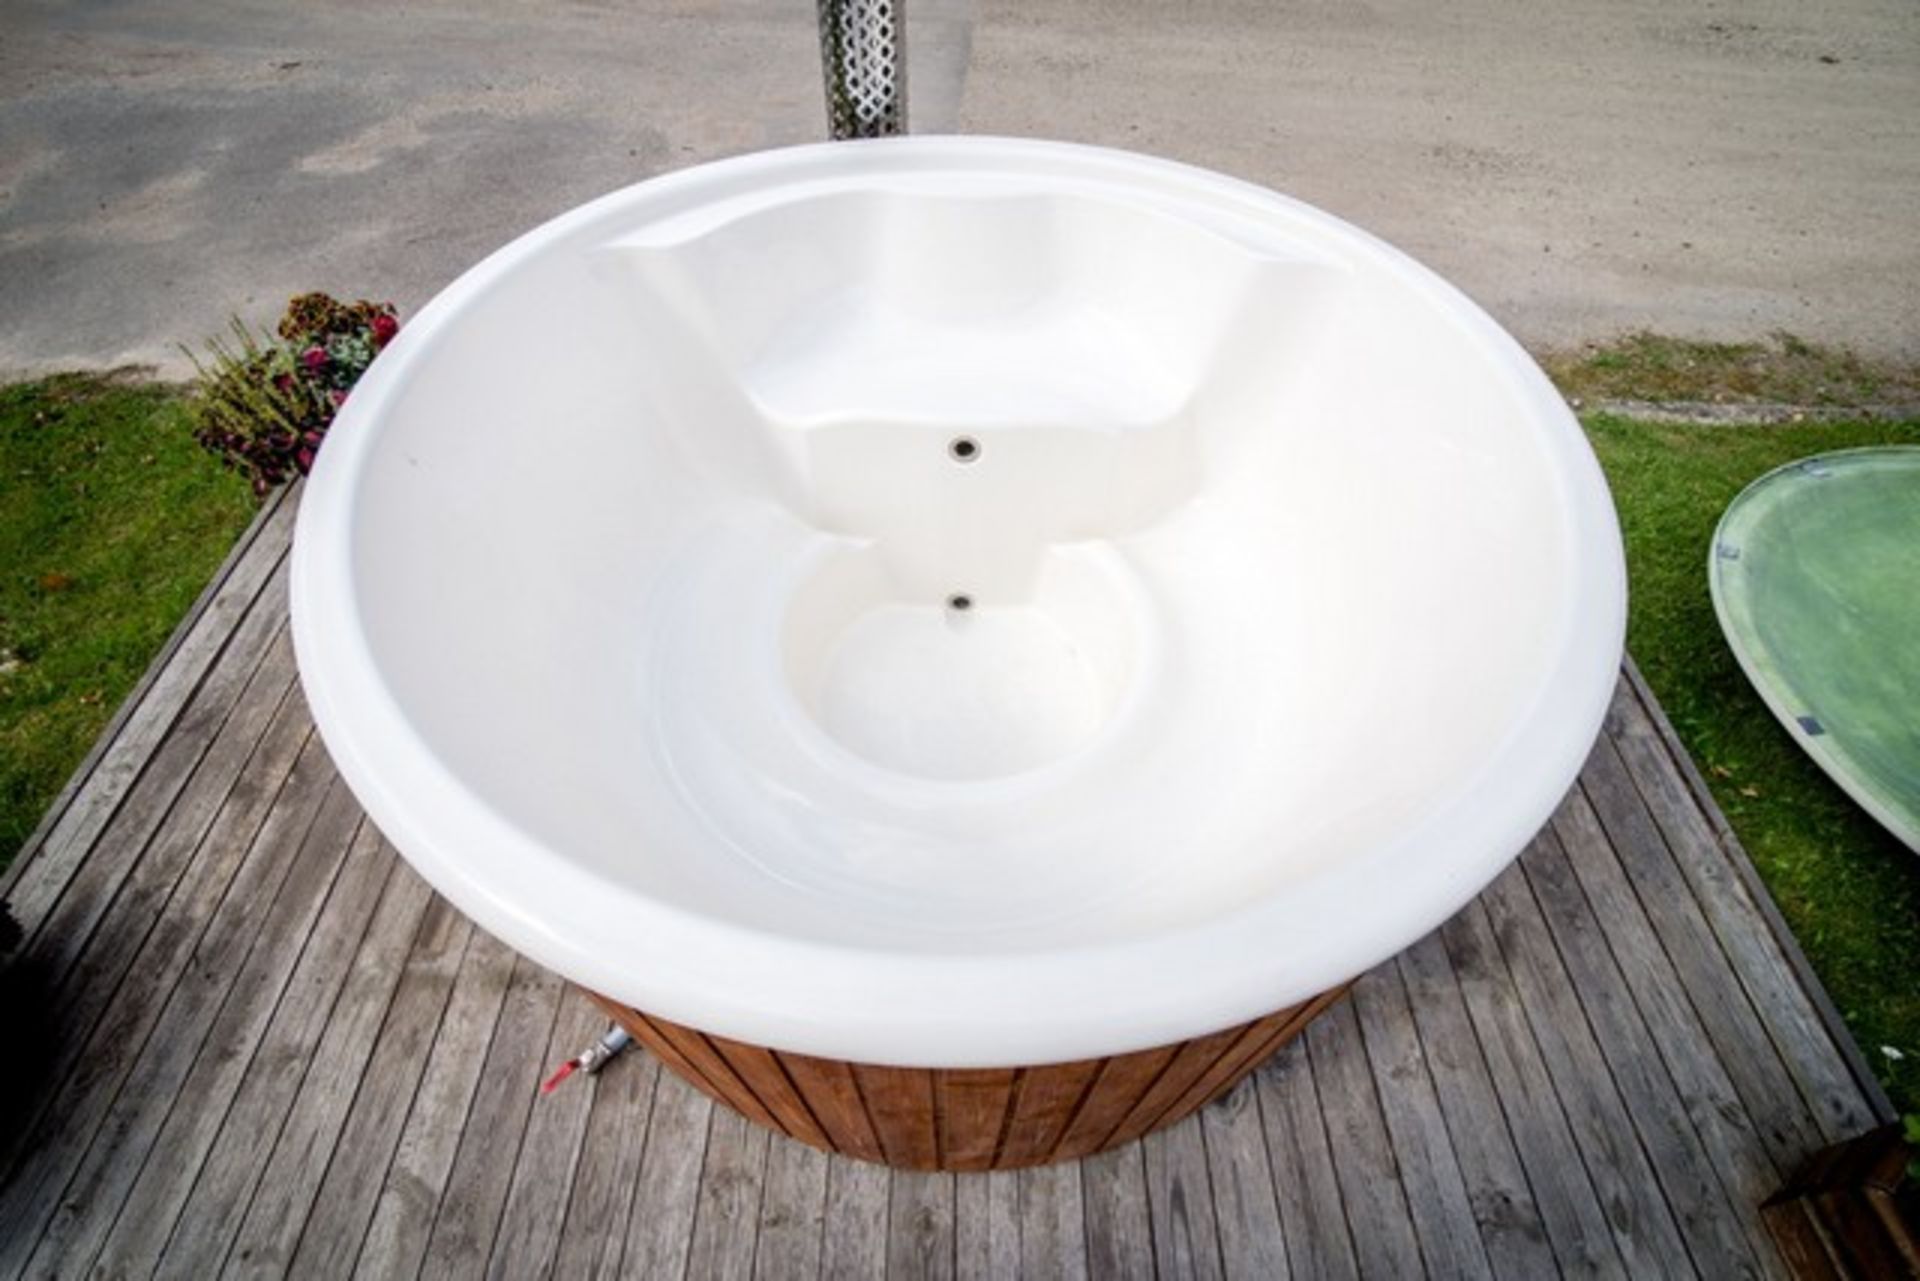 + VAT Brand New 1.8m Fiberglass Hot Tub with Stainless Steel Heater and Chimney - Hot Tub Made from - Image 2 of 2